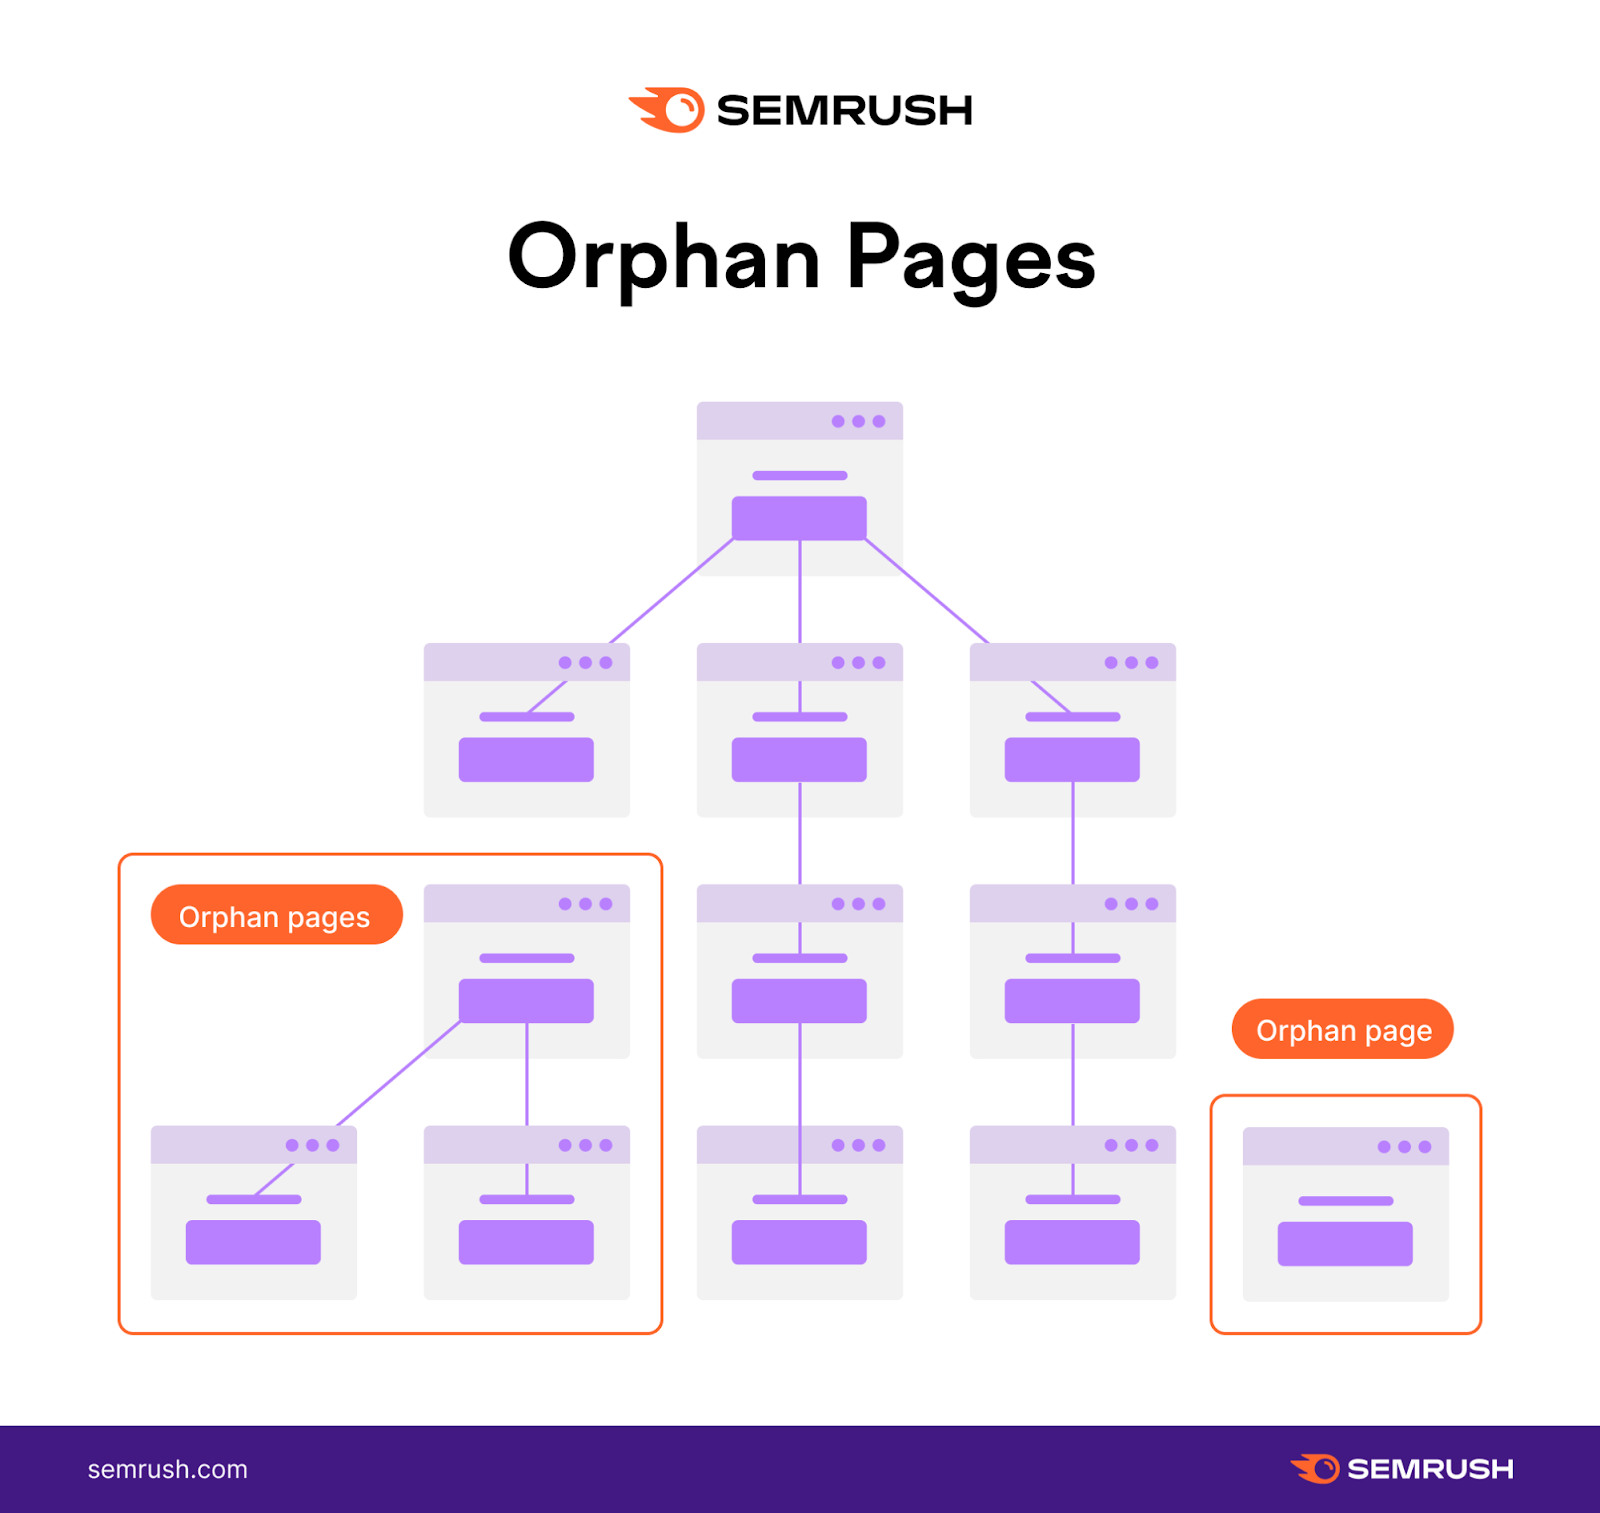 A visual representation of orphan pages